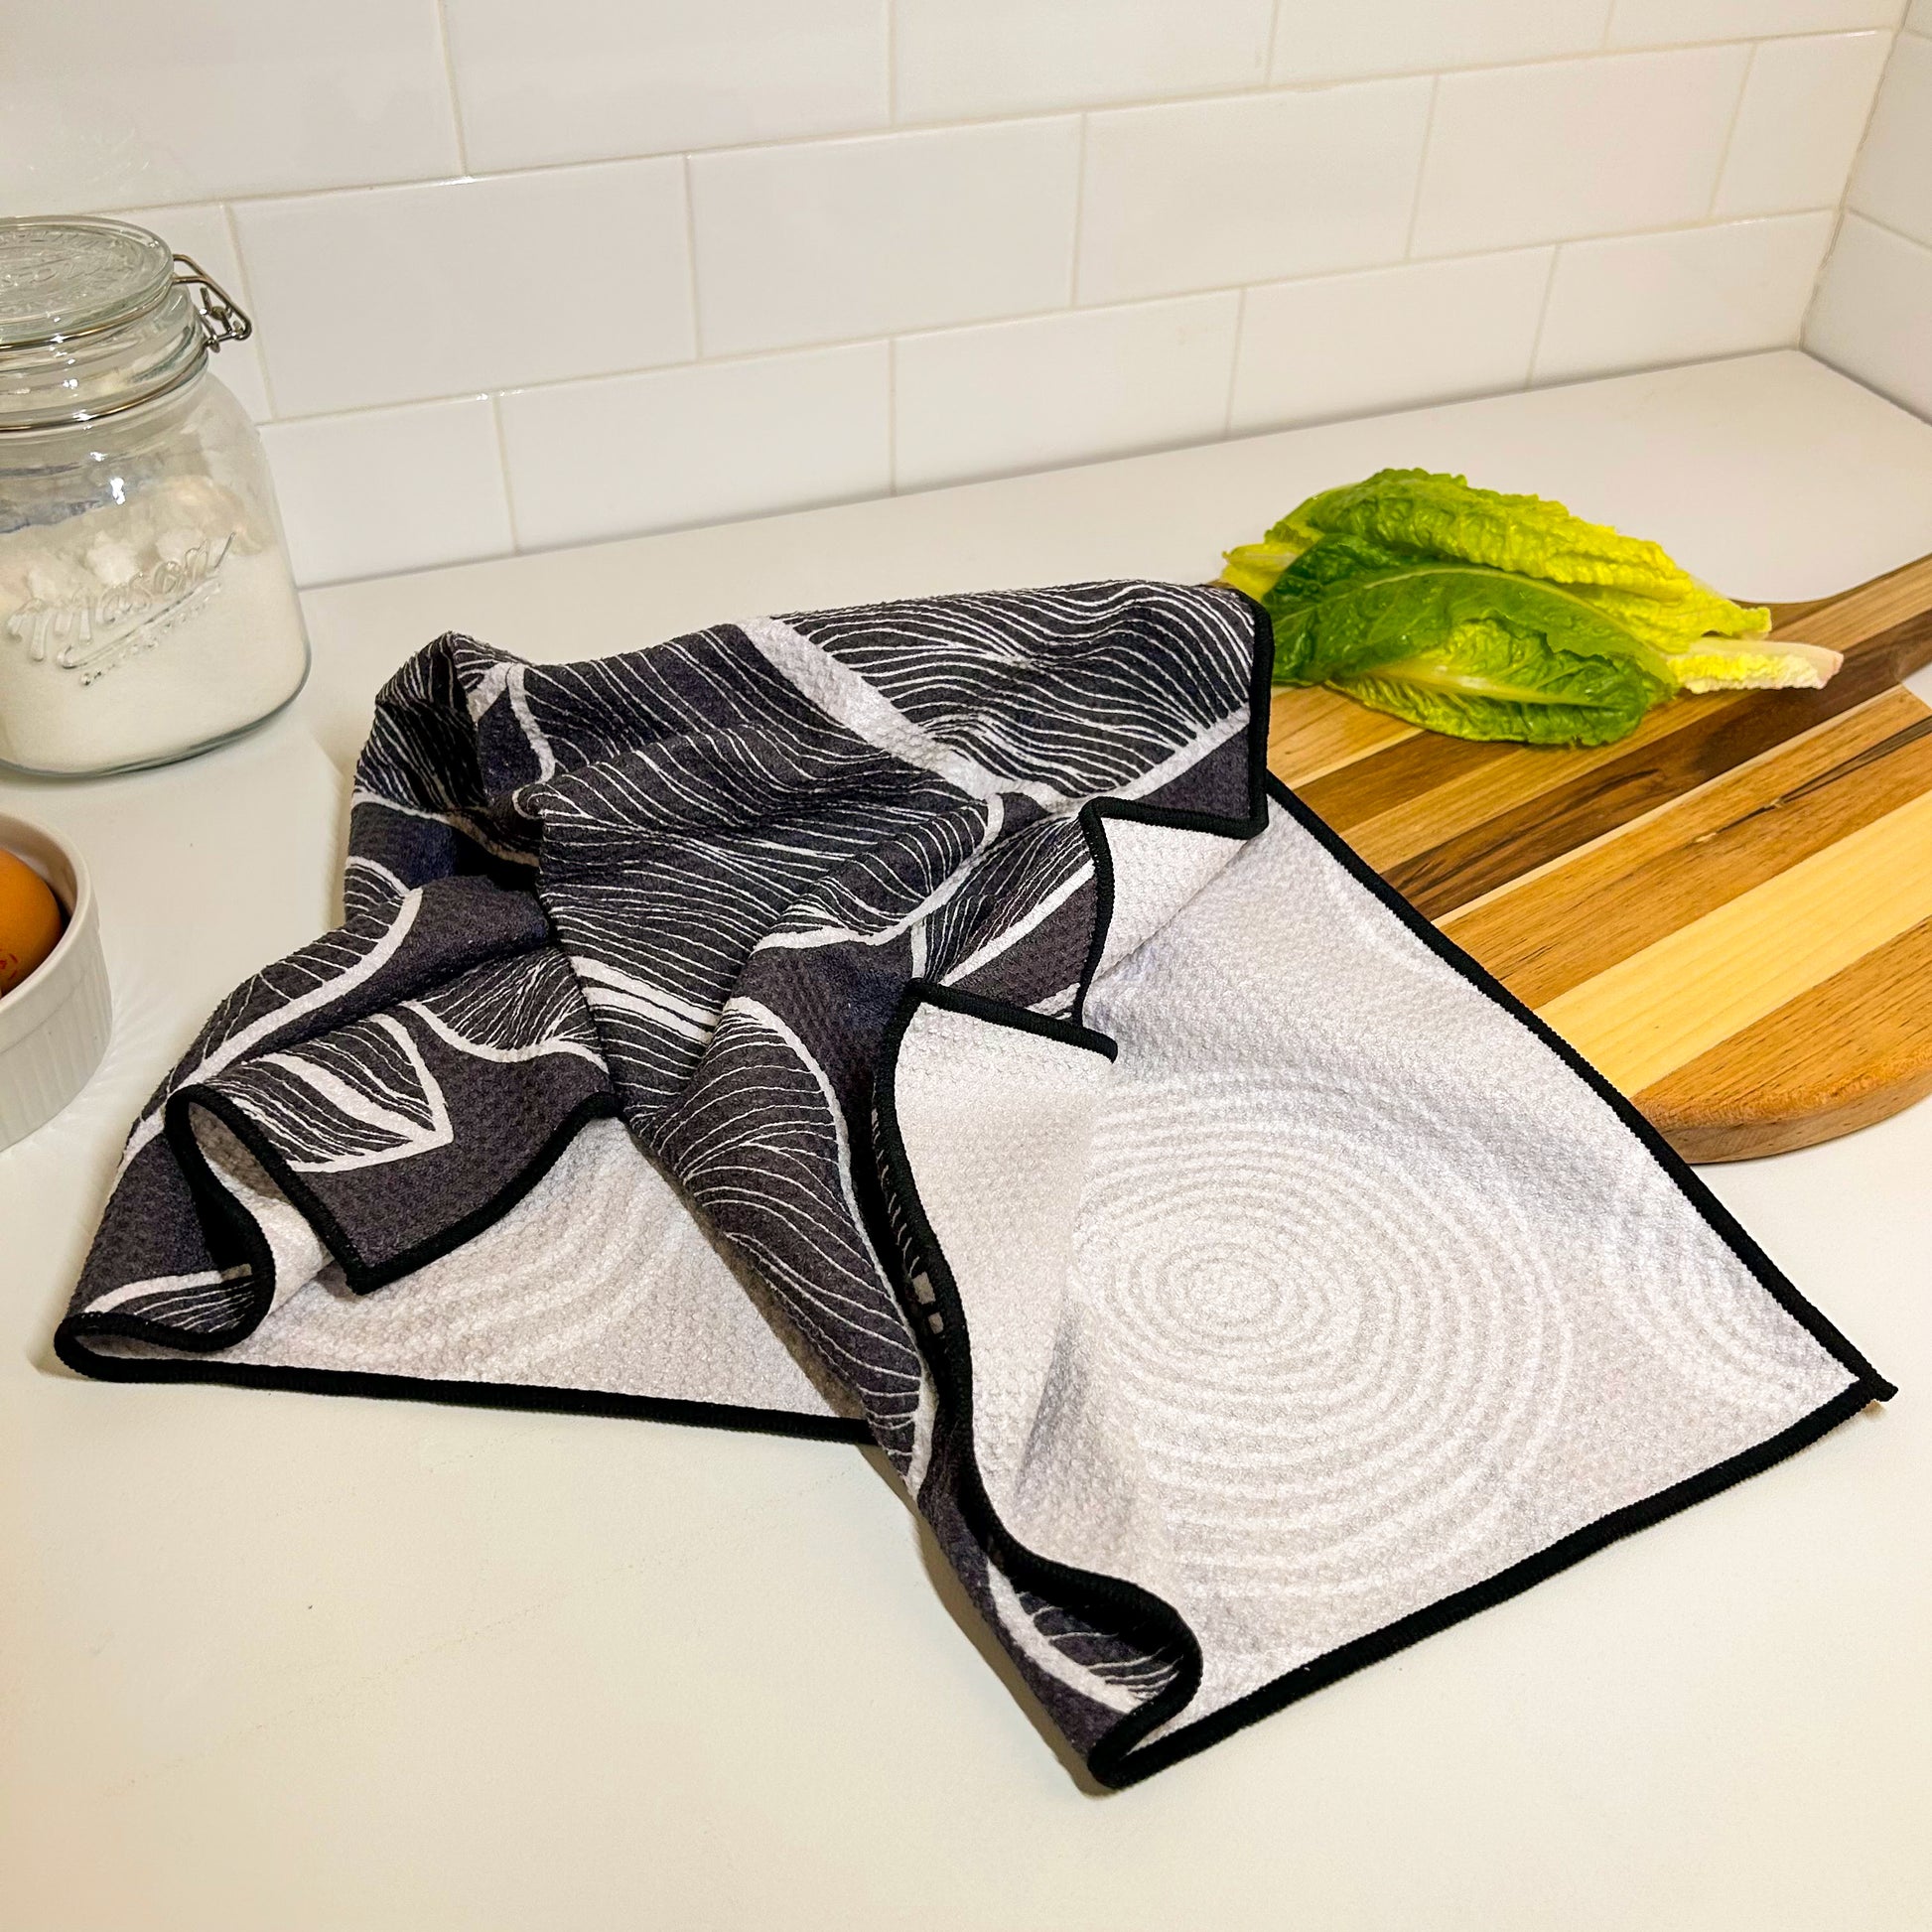 The Best Dish Towels to Buy Now